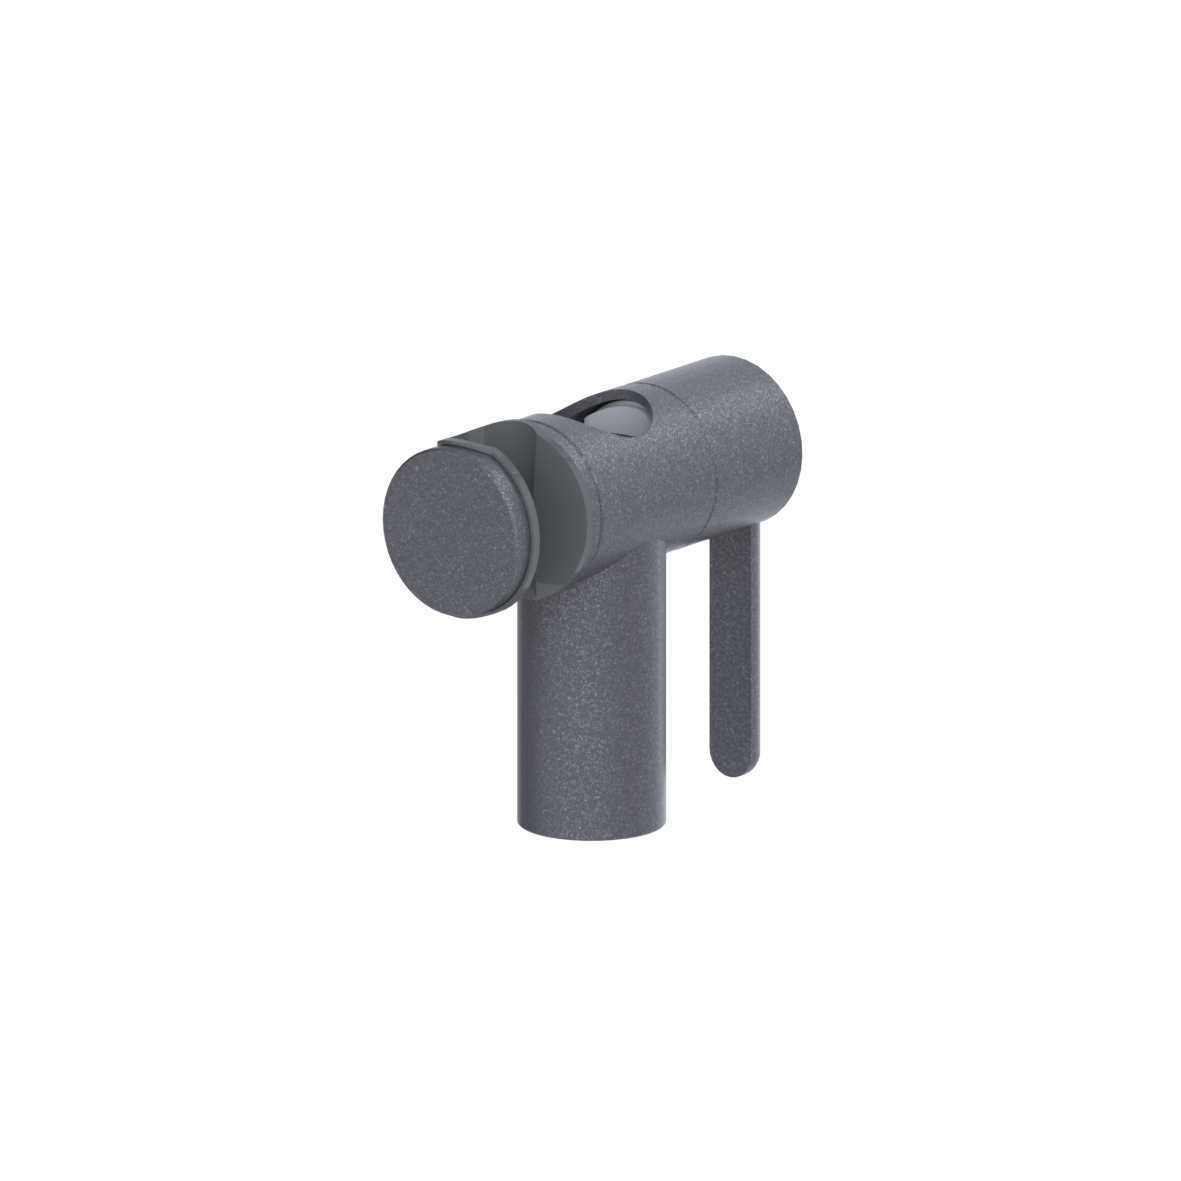 Cavere Care Shower head holder, left and right, 120 x 45 x 112 mm, Cavere Metallic anthracite